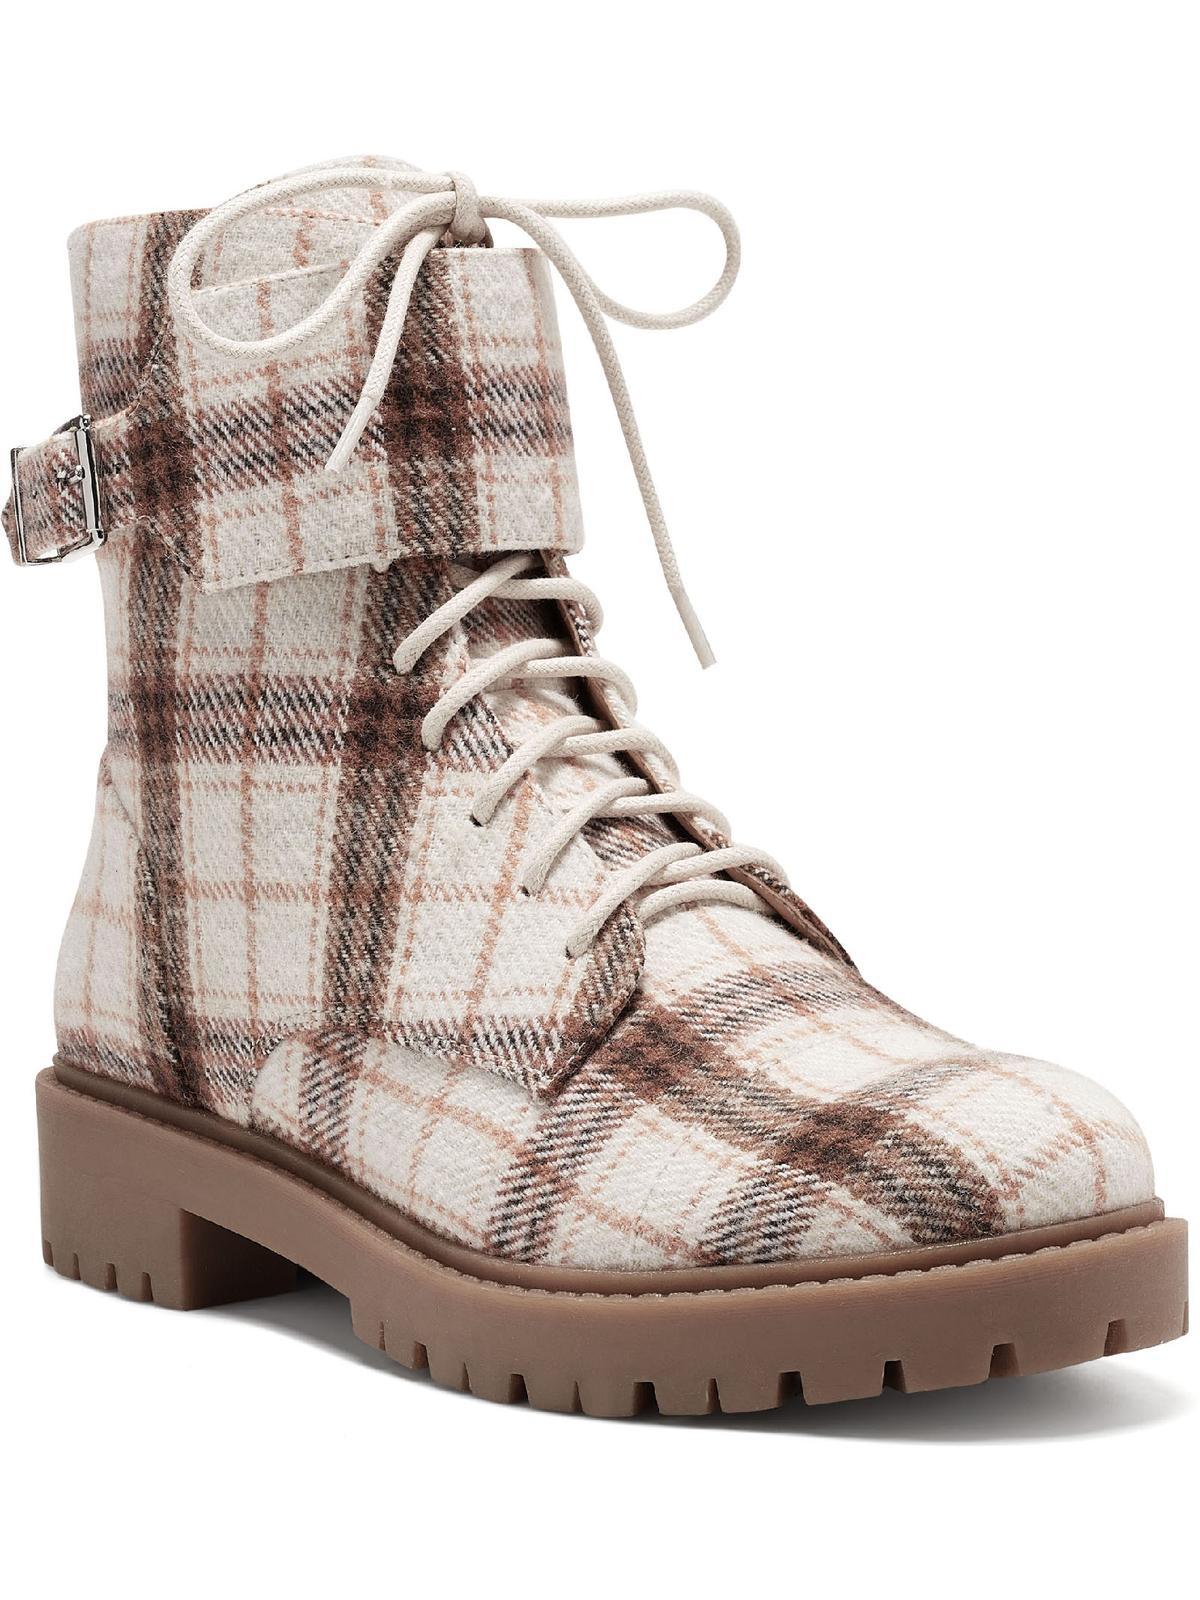 Jessica Simpson Karia 2 Plaid Ankle Combat & Lace-up Boots in Natural ...